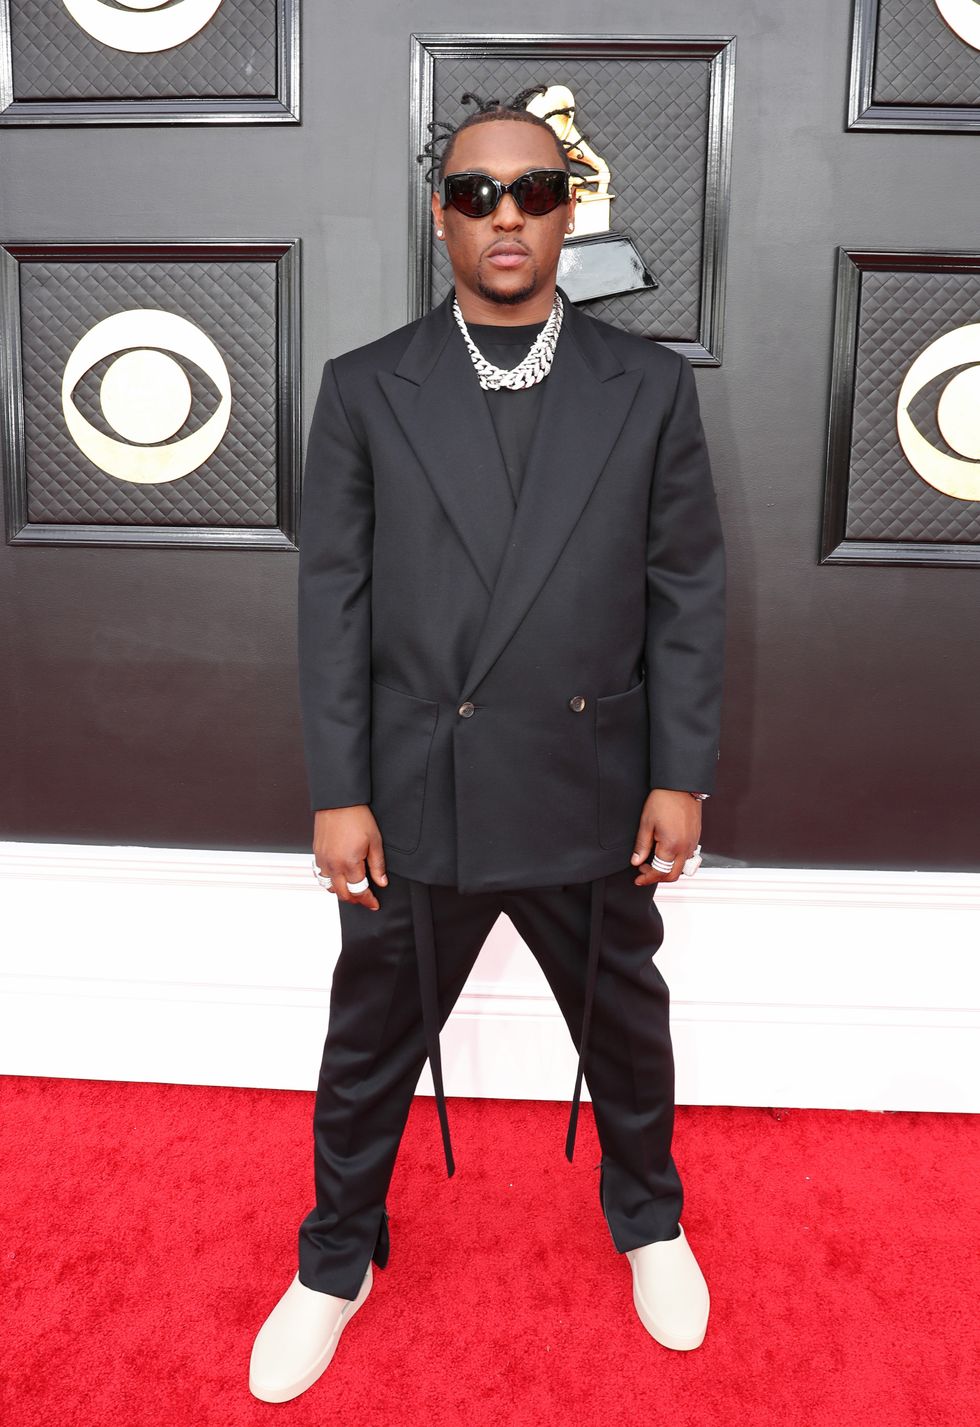 Grammys 2022: The Best-Dressed Men on the Red Carpet